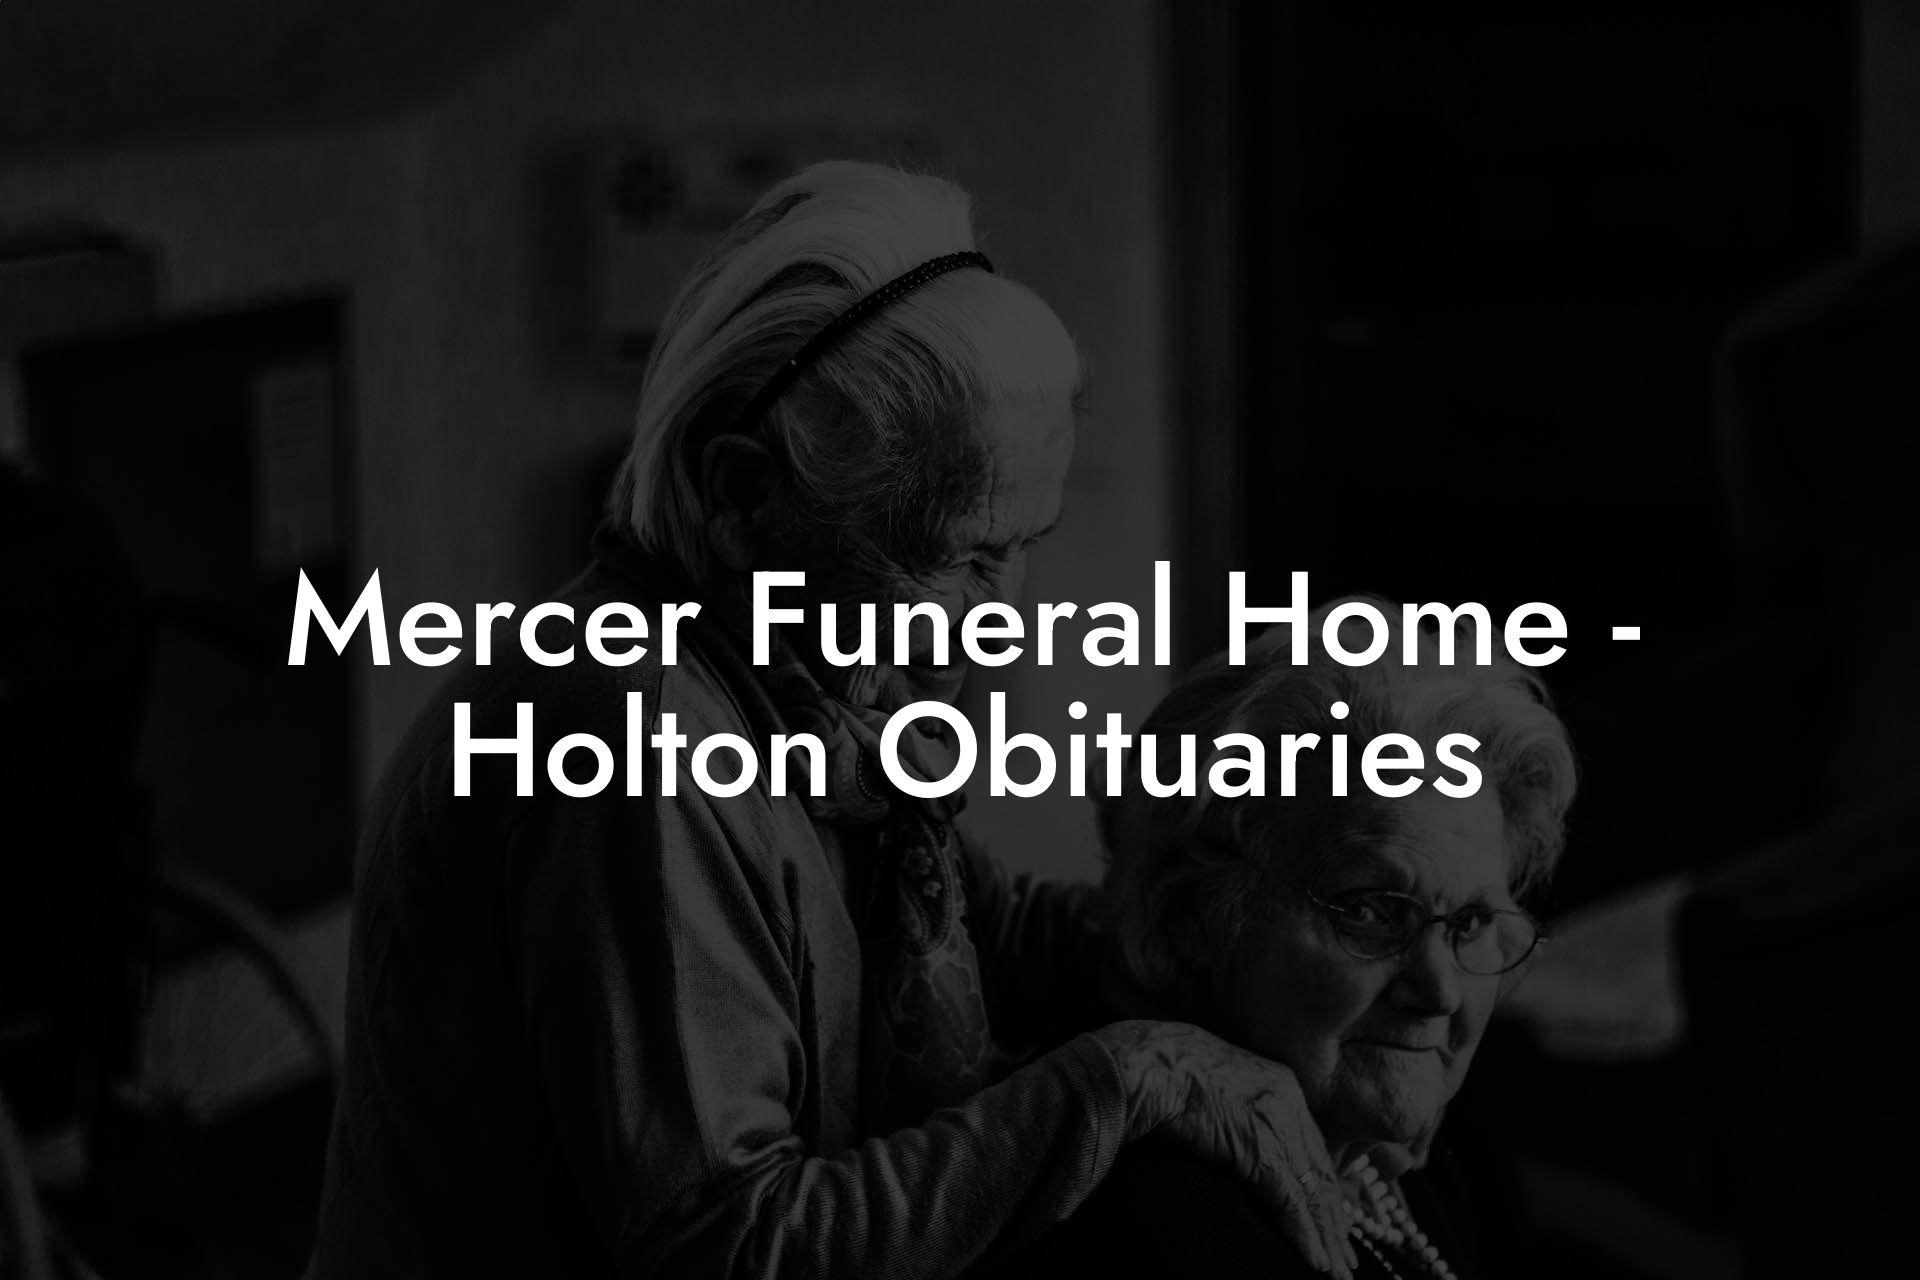 Mercer Funeral Home - Holton Obituaries